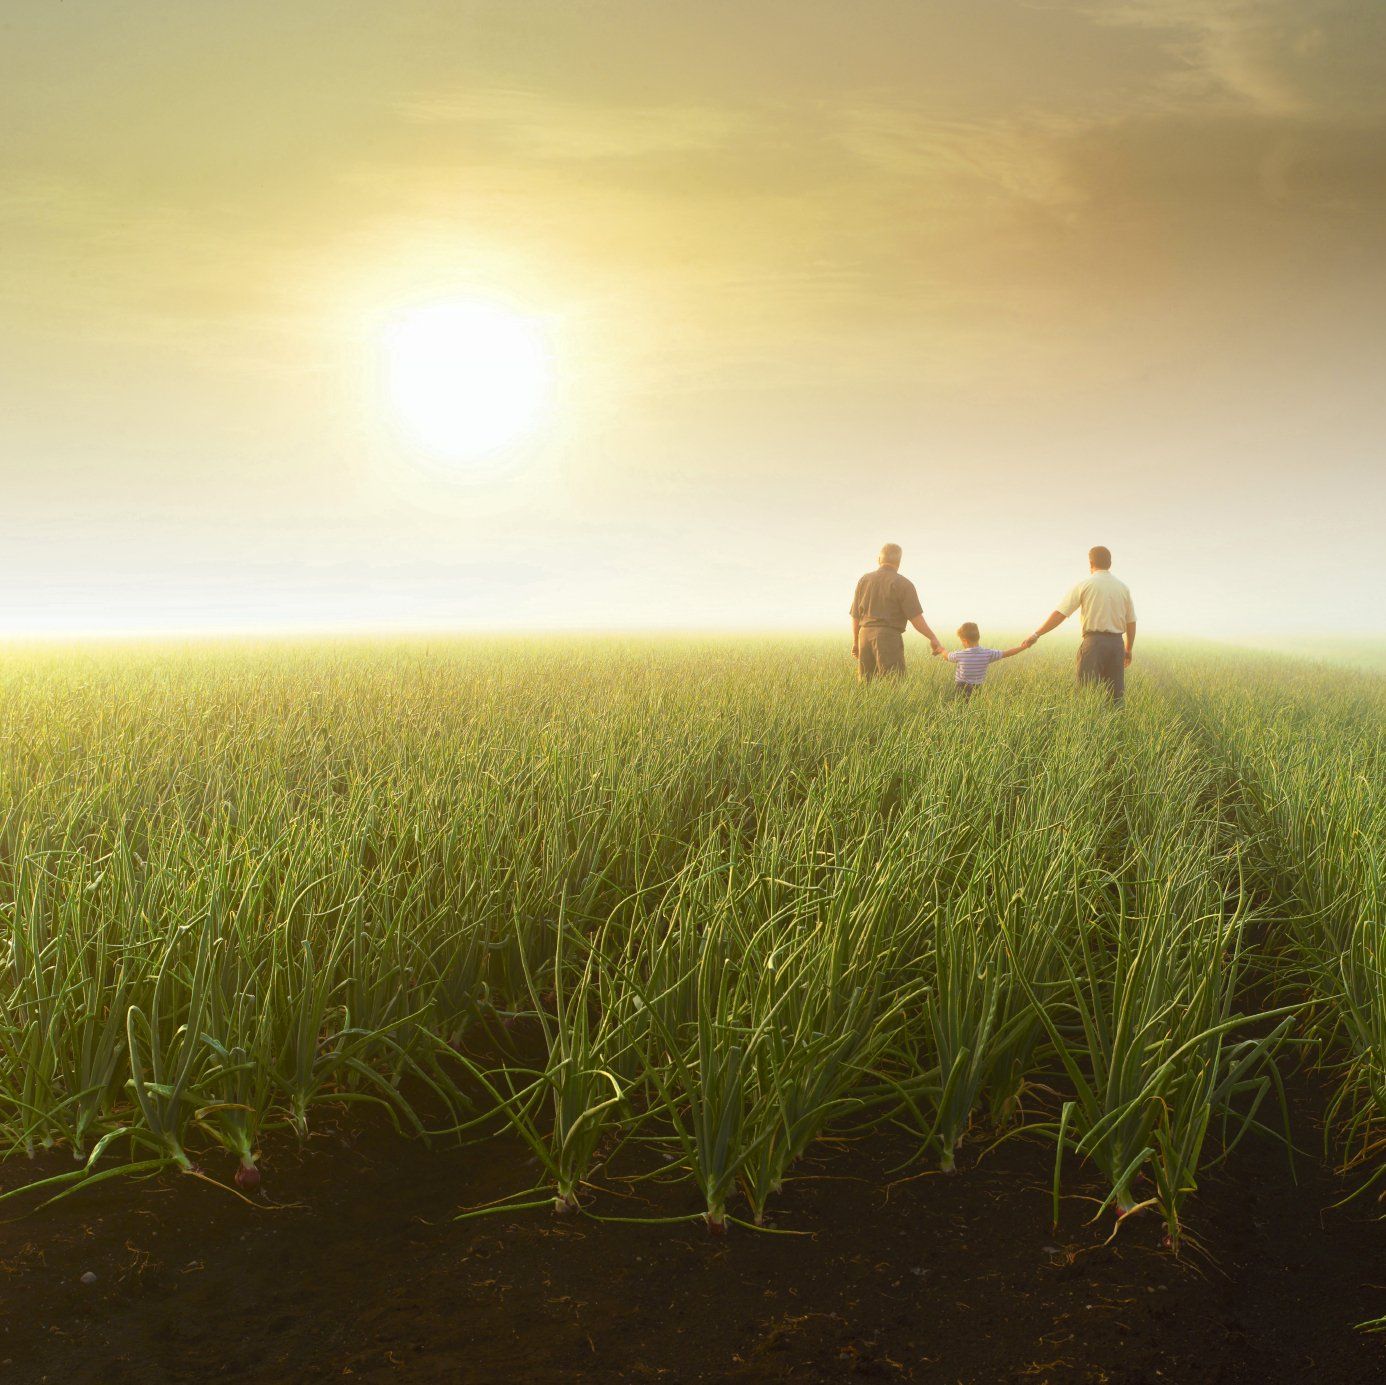 Grandfather, Son and Grandson walking through a field, represents estate planning to provide for future generations